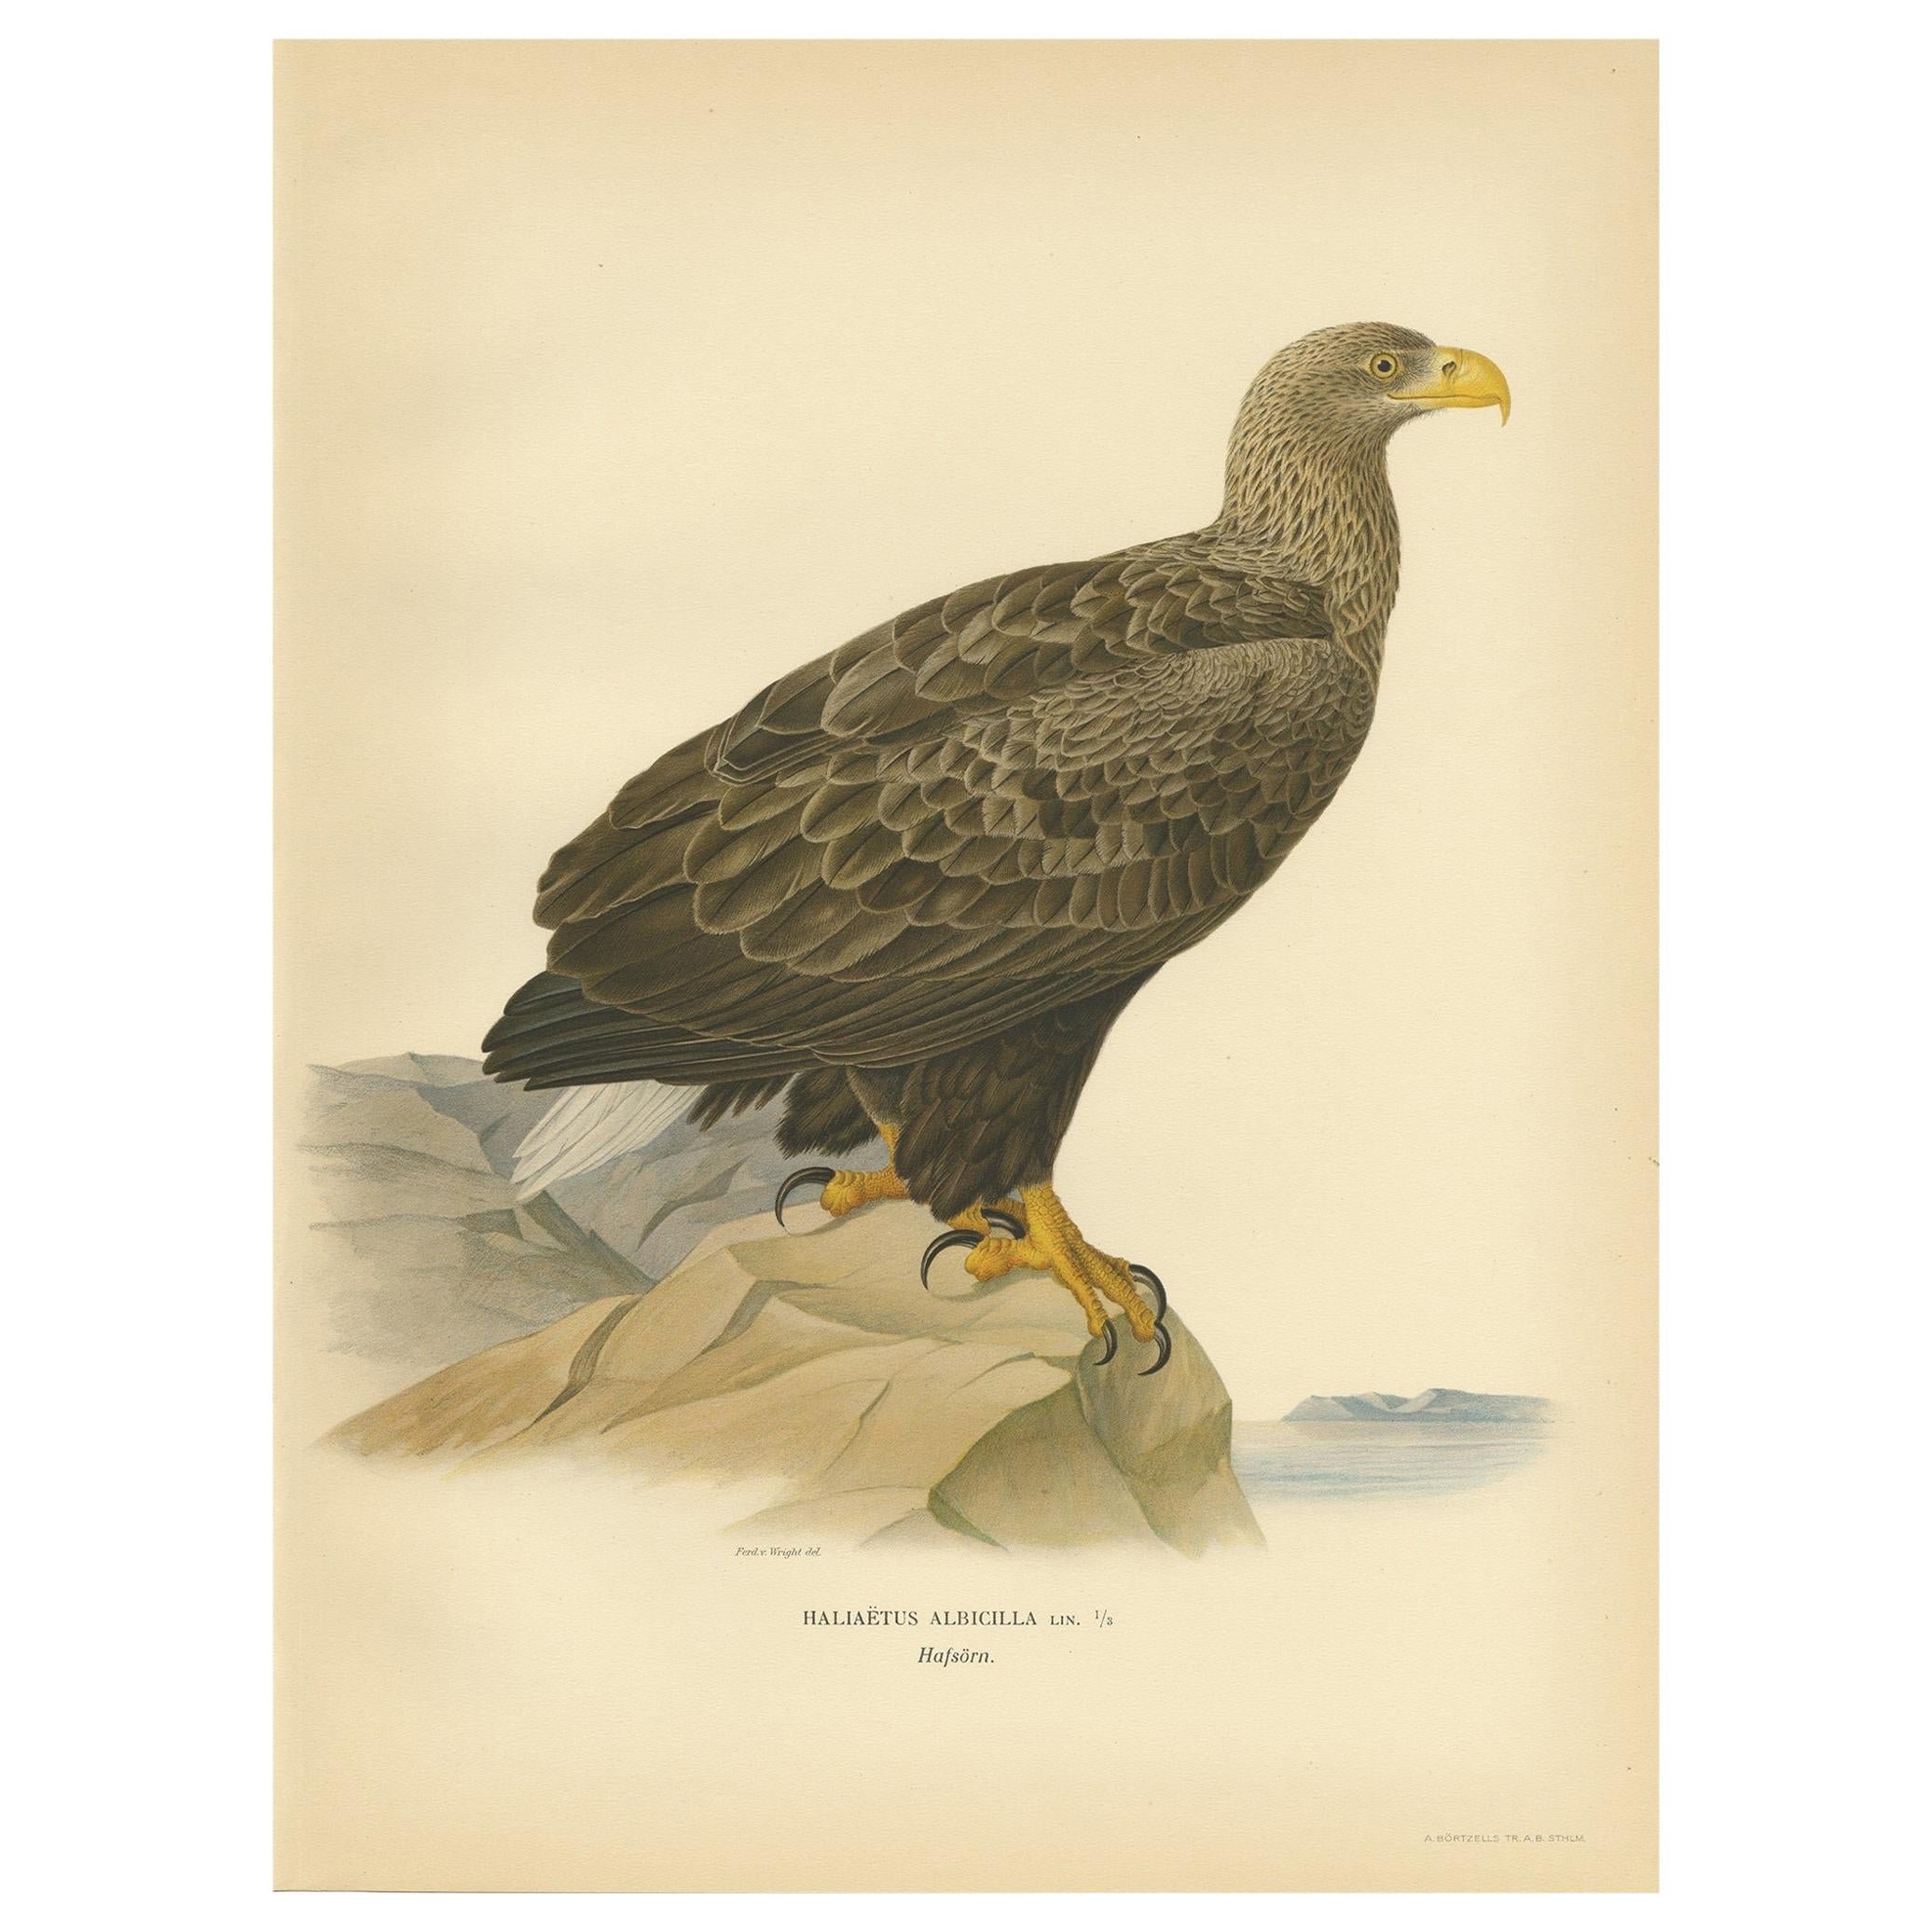 Antique Bird Print of the White-Tailed Eagle, '1929'